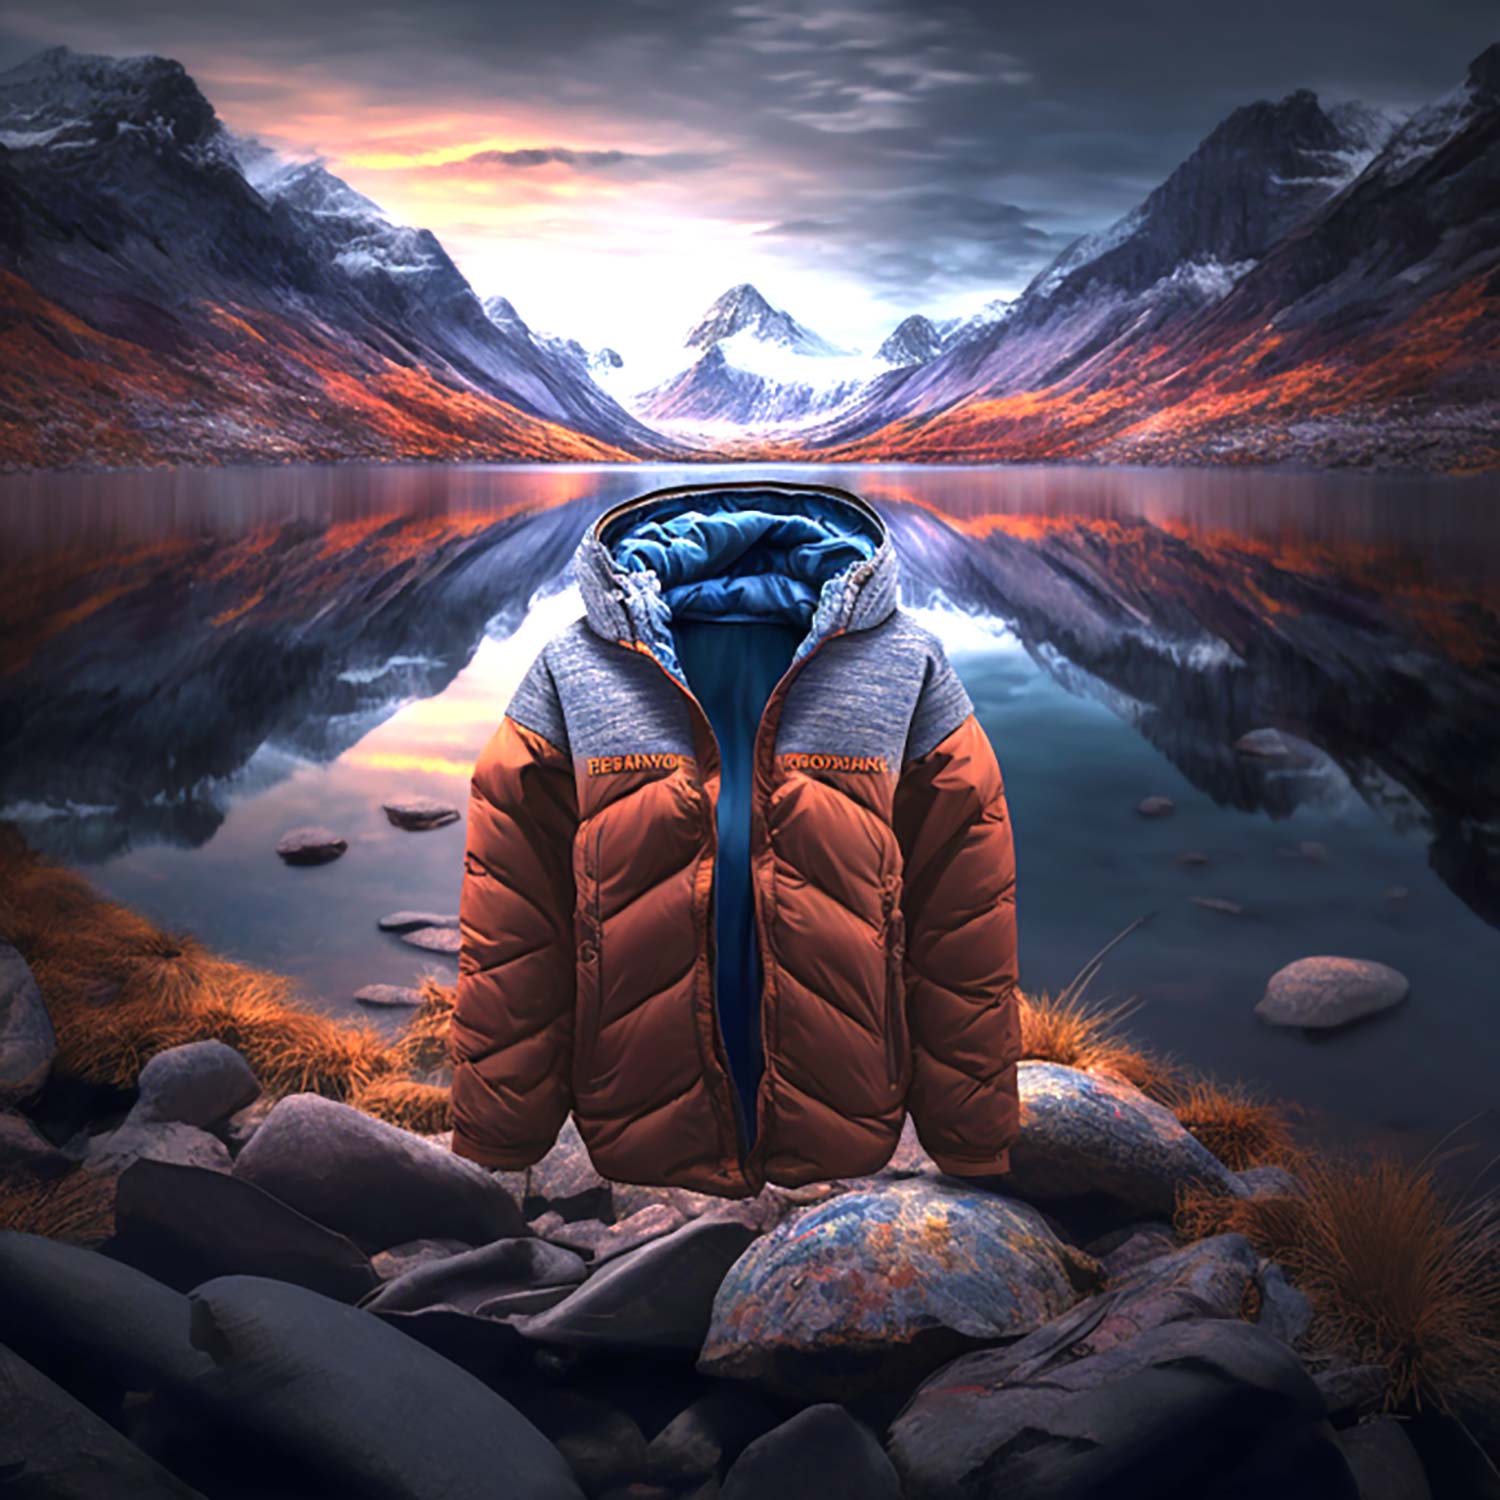 This image shows an illustration of an outdoor jacket.